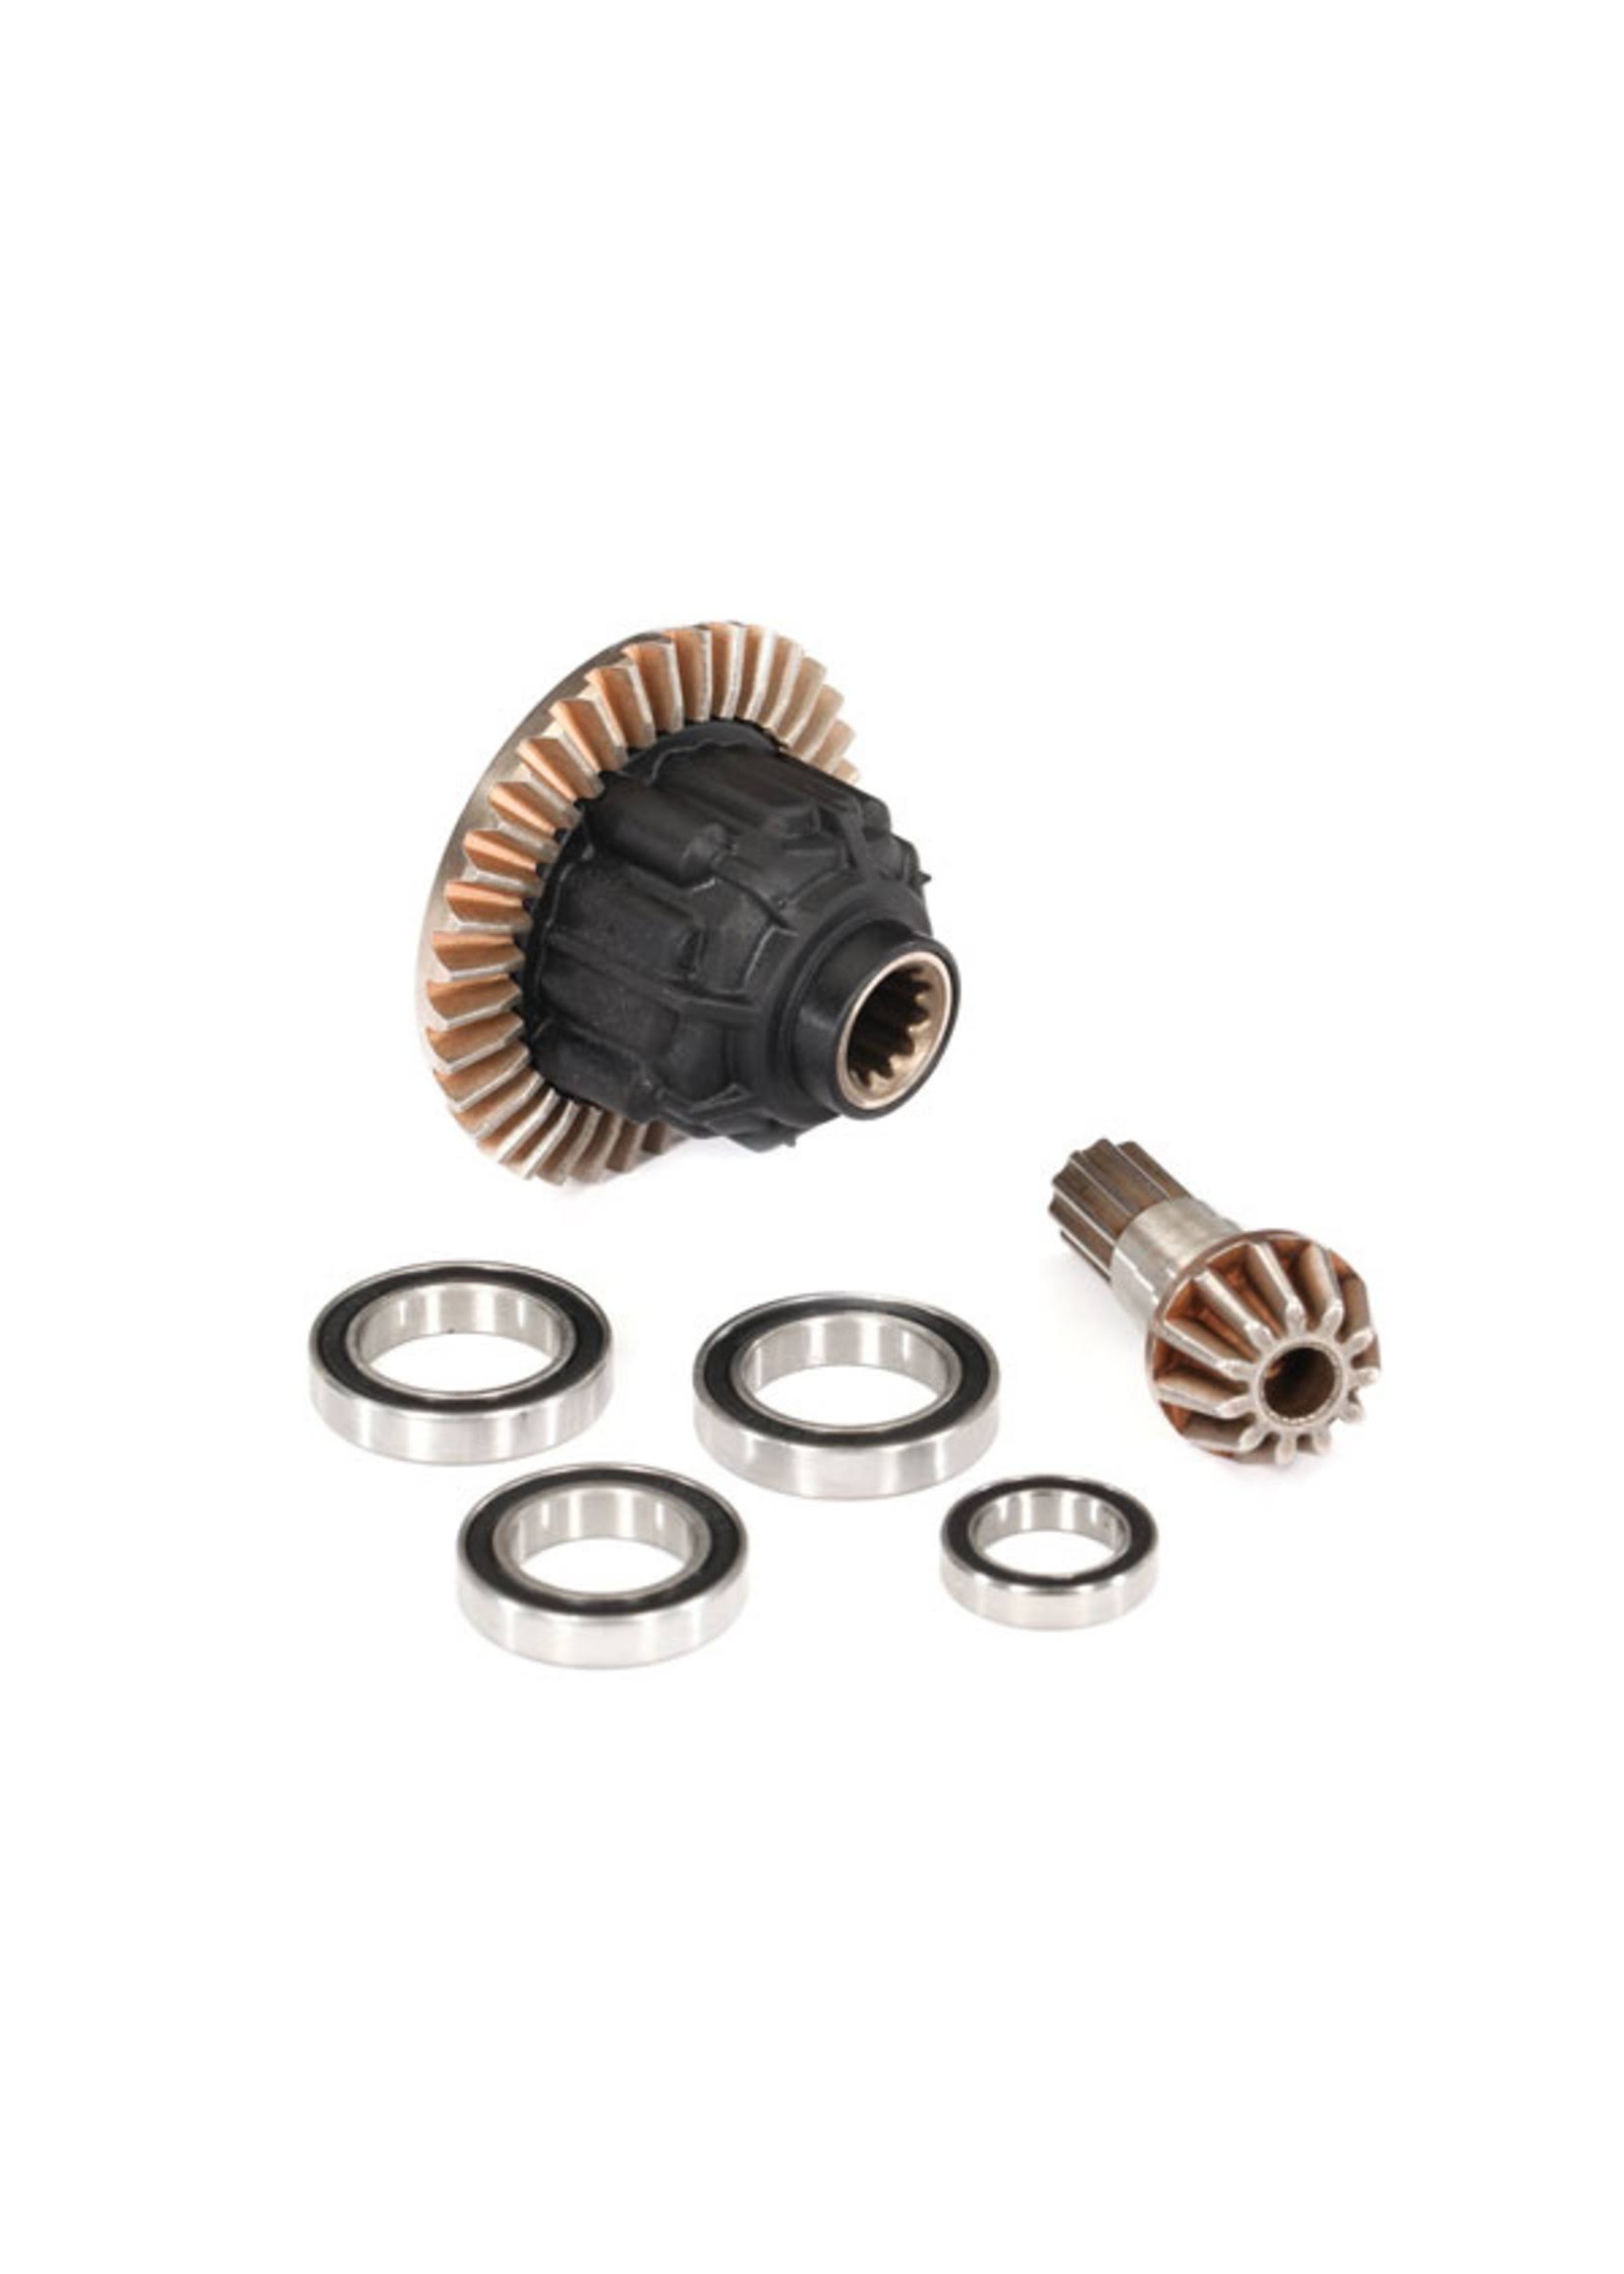 Traxxas 7880 - Differential, Front, Complete (Fits X-Maxx 8S)